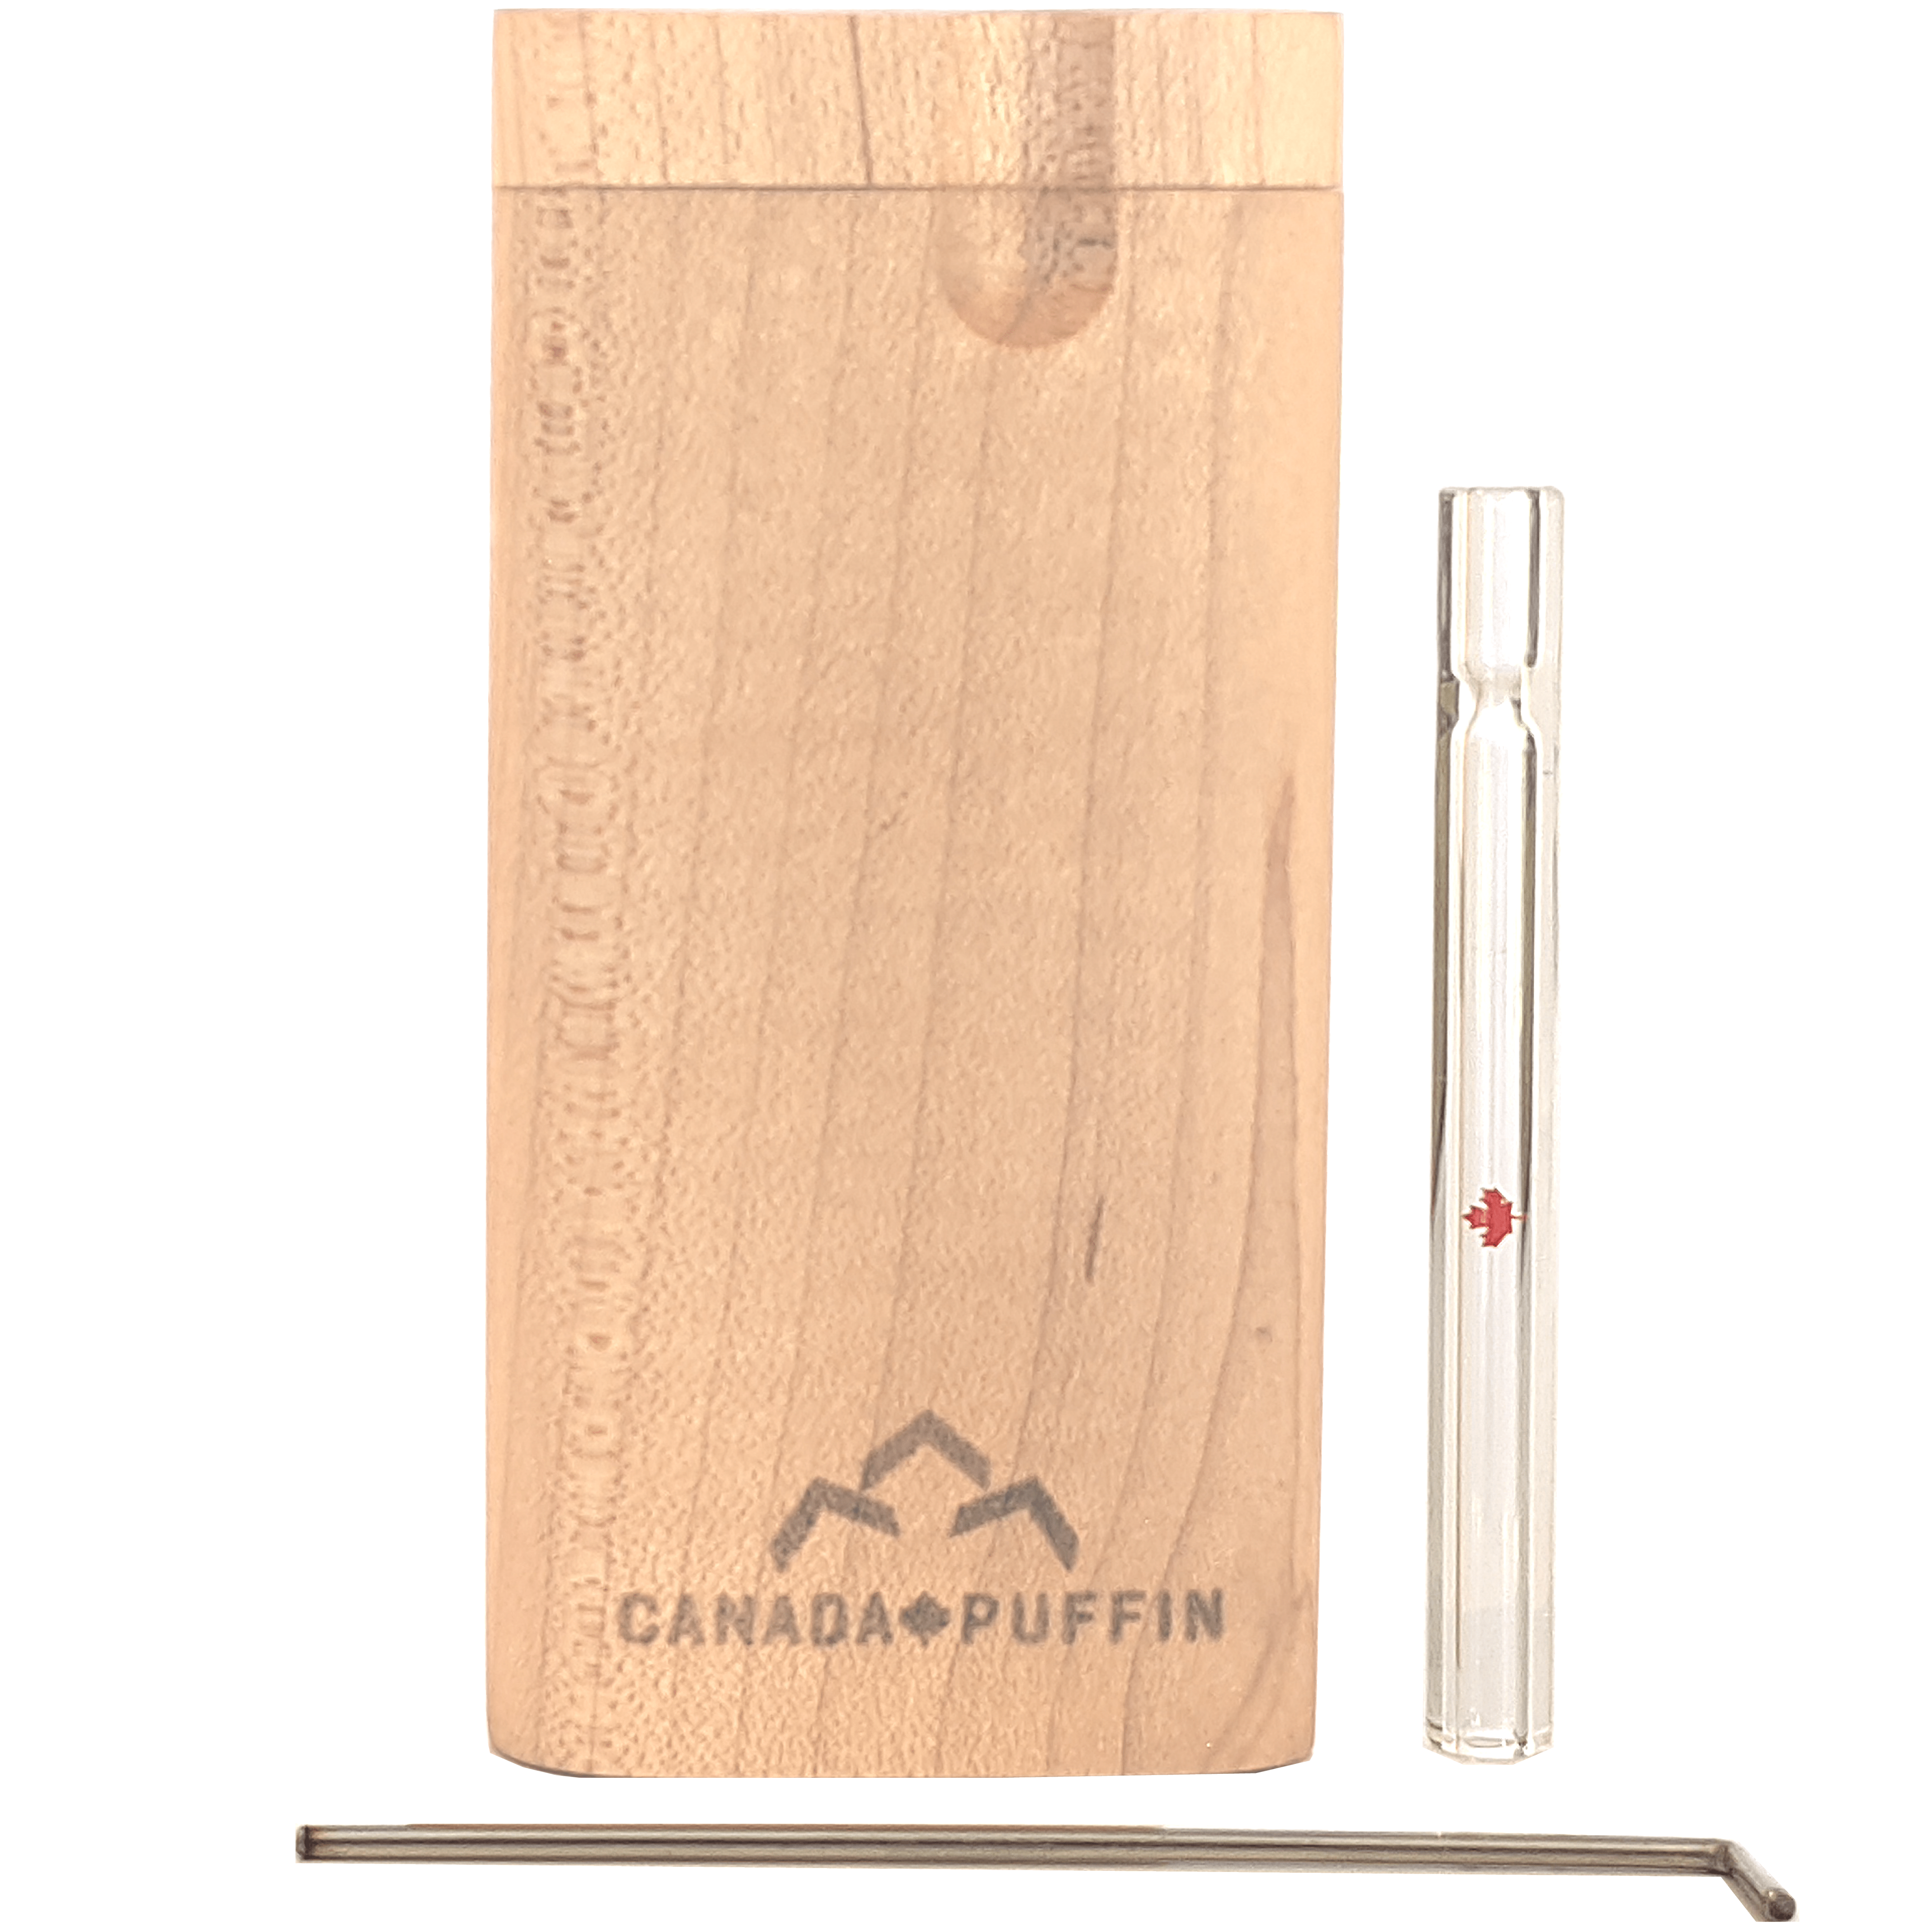 Canada Puffin Dugout 1 Pack Banff Dugout and One Hitter